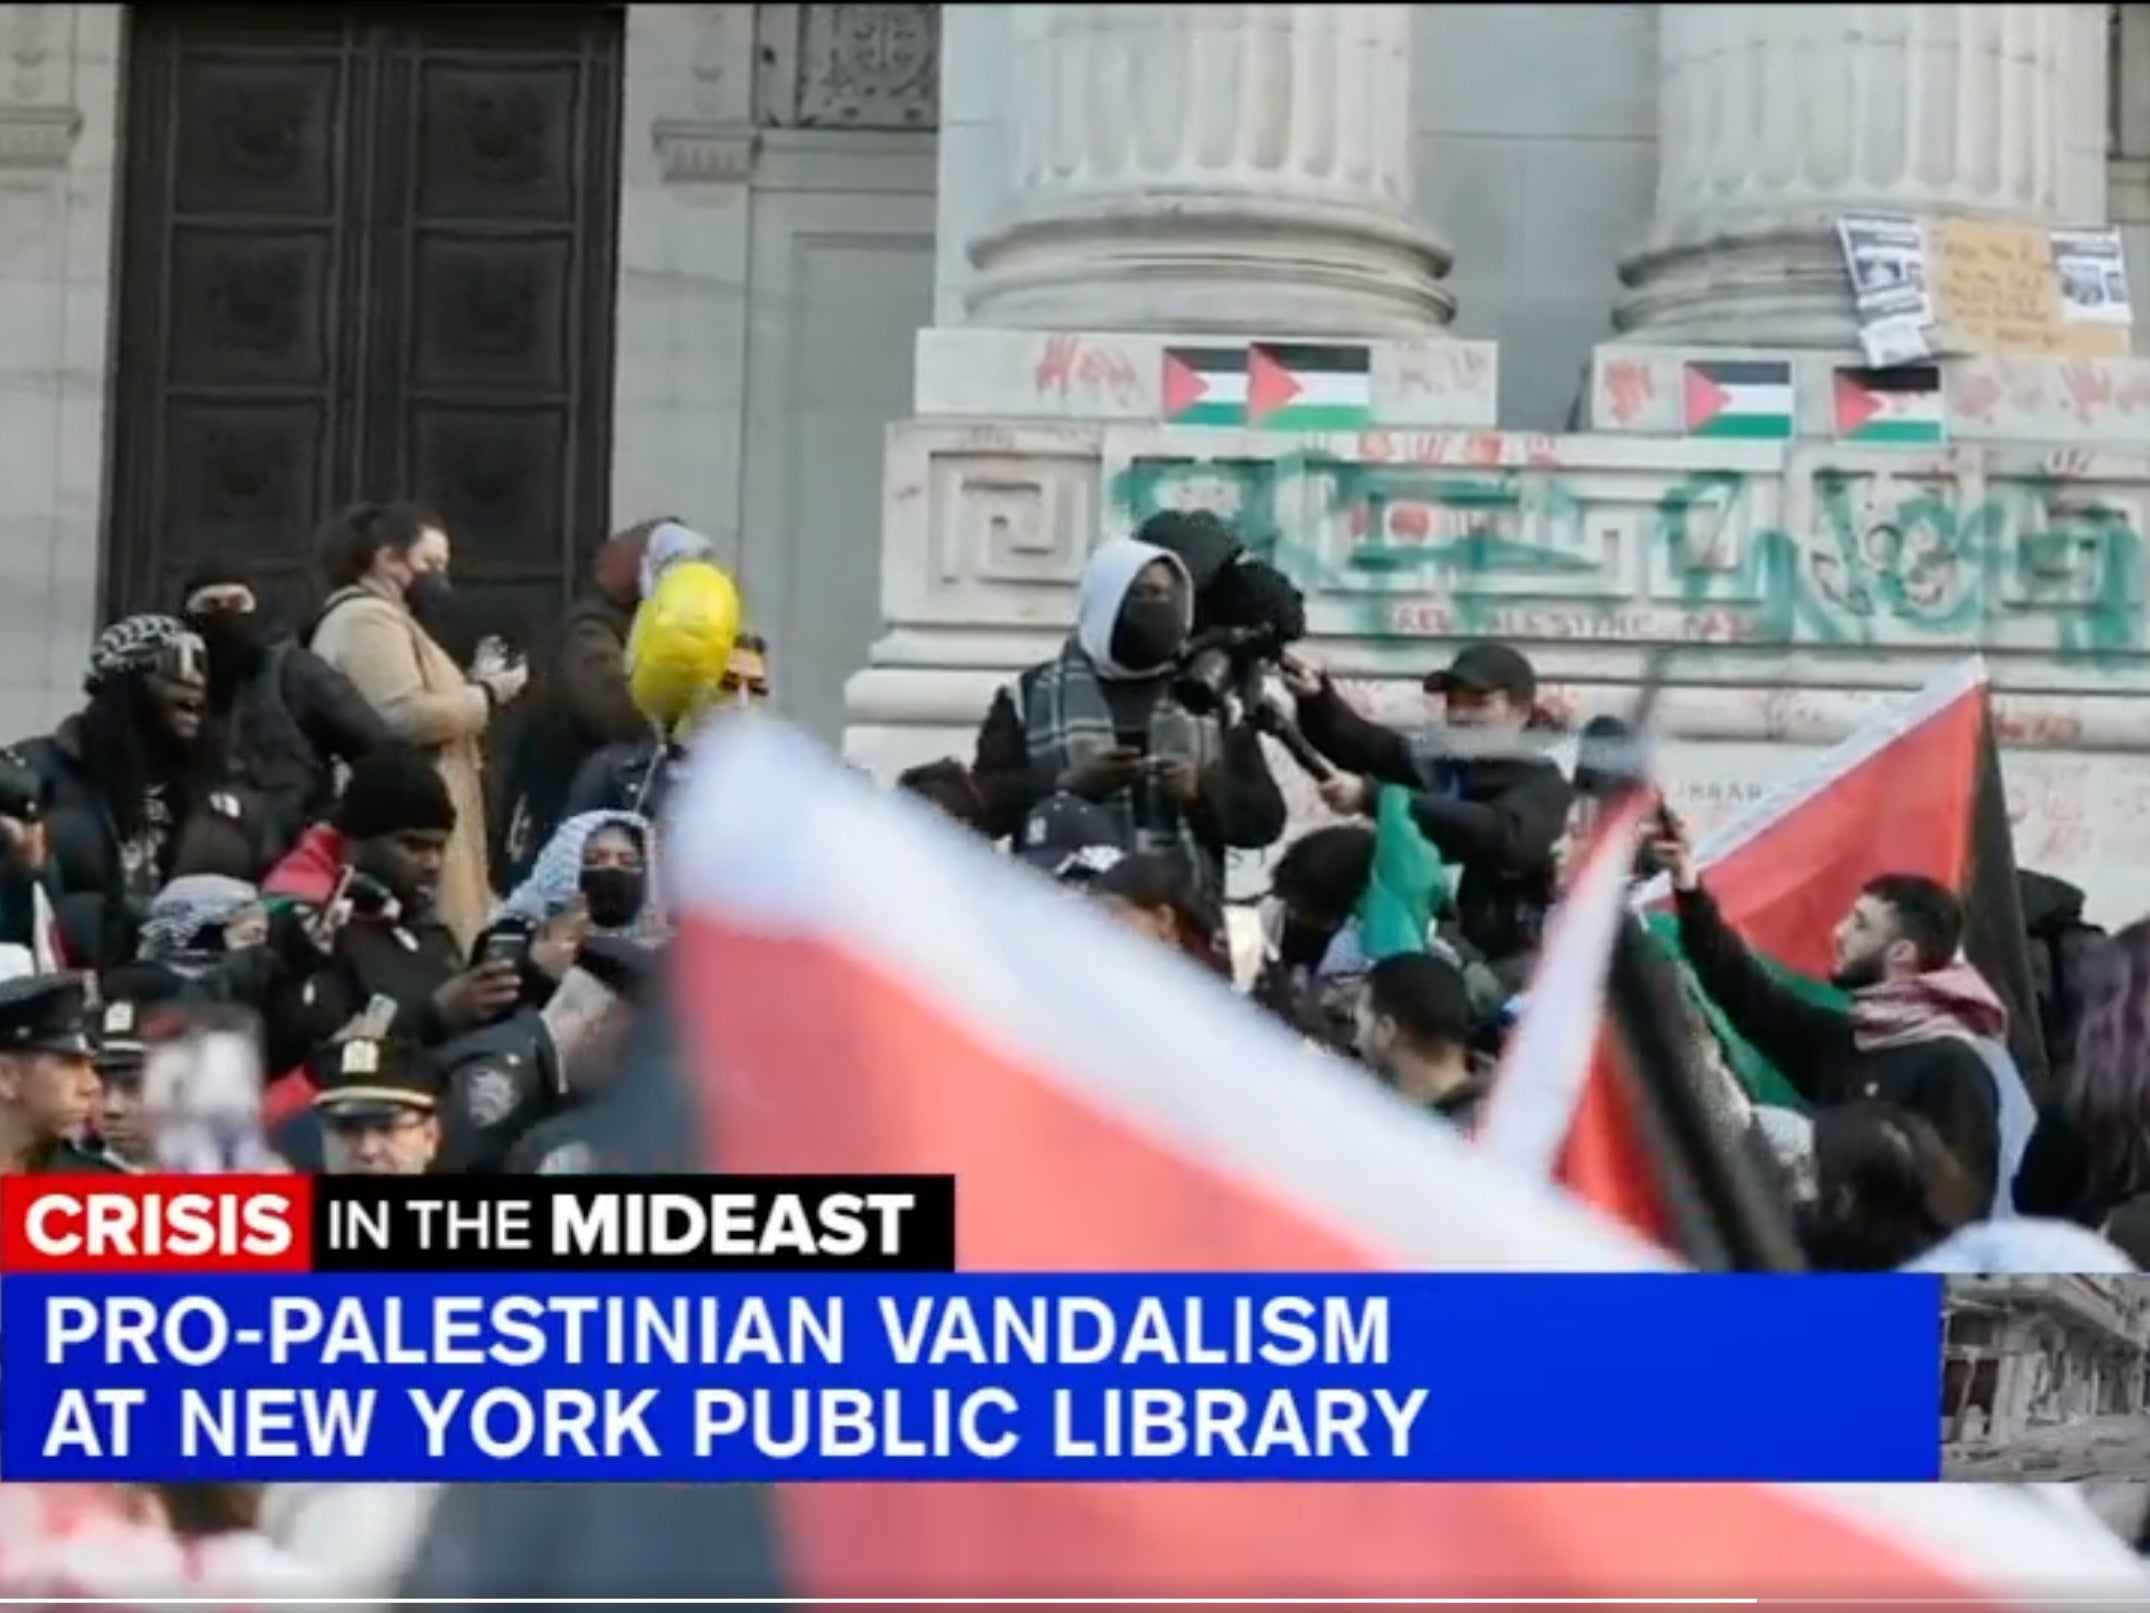 <p>Demonstrators defaced New York Public Library in pro-Palestine protest</p>